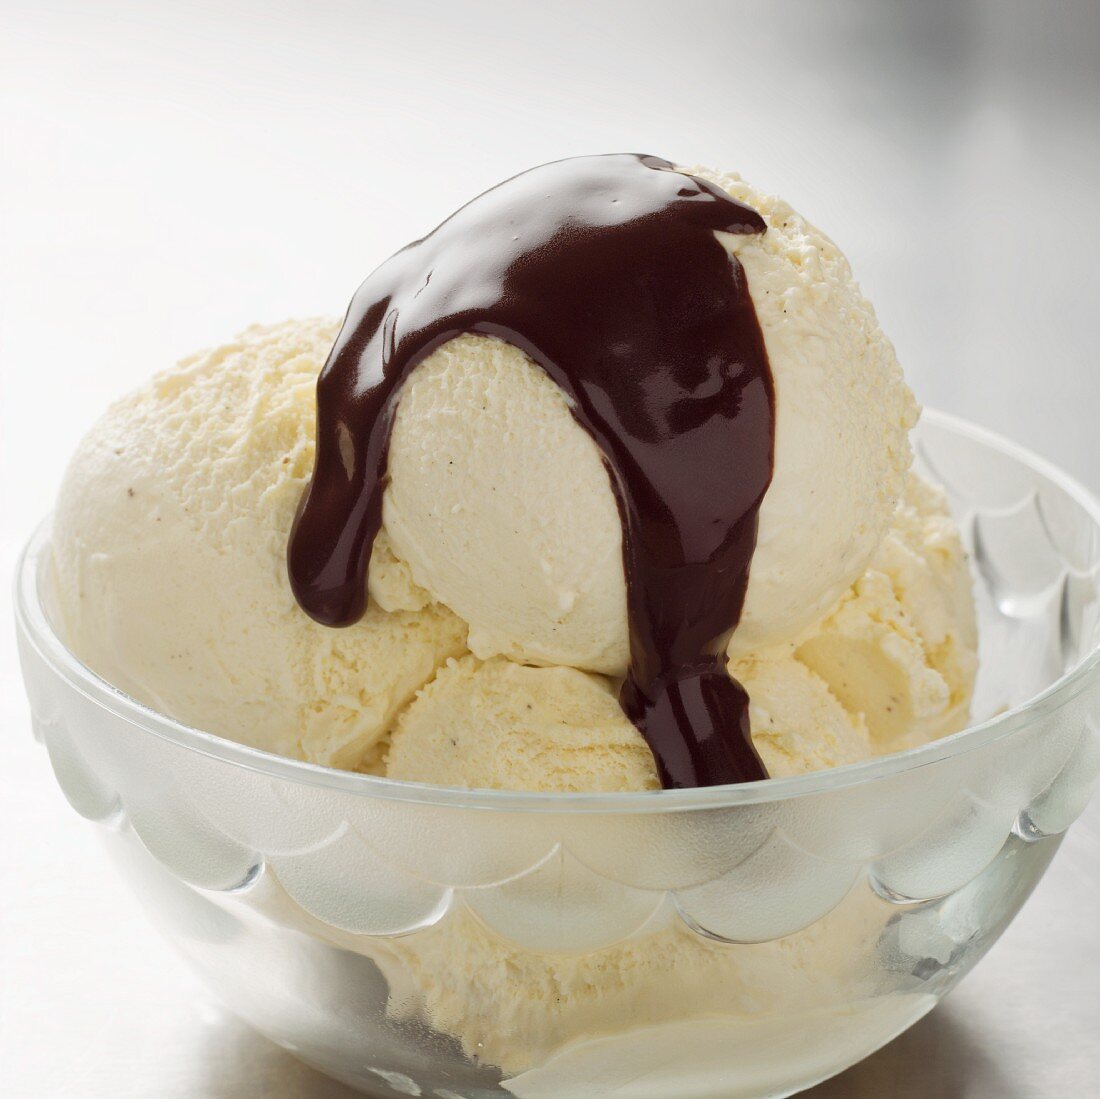 Vanilla ice cream with chocolate sauce in a glass bowl